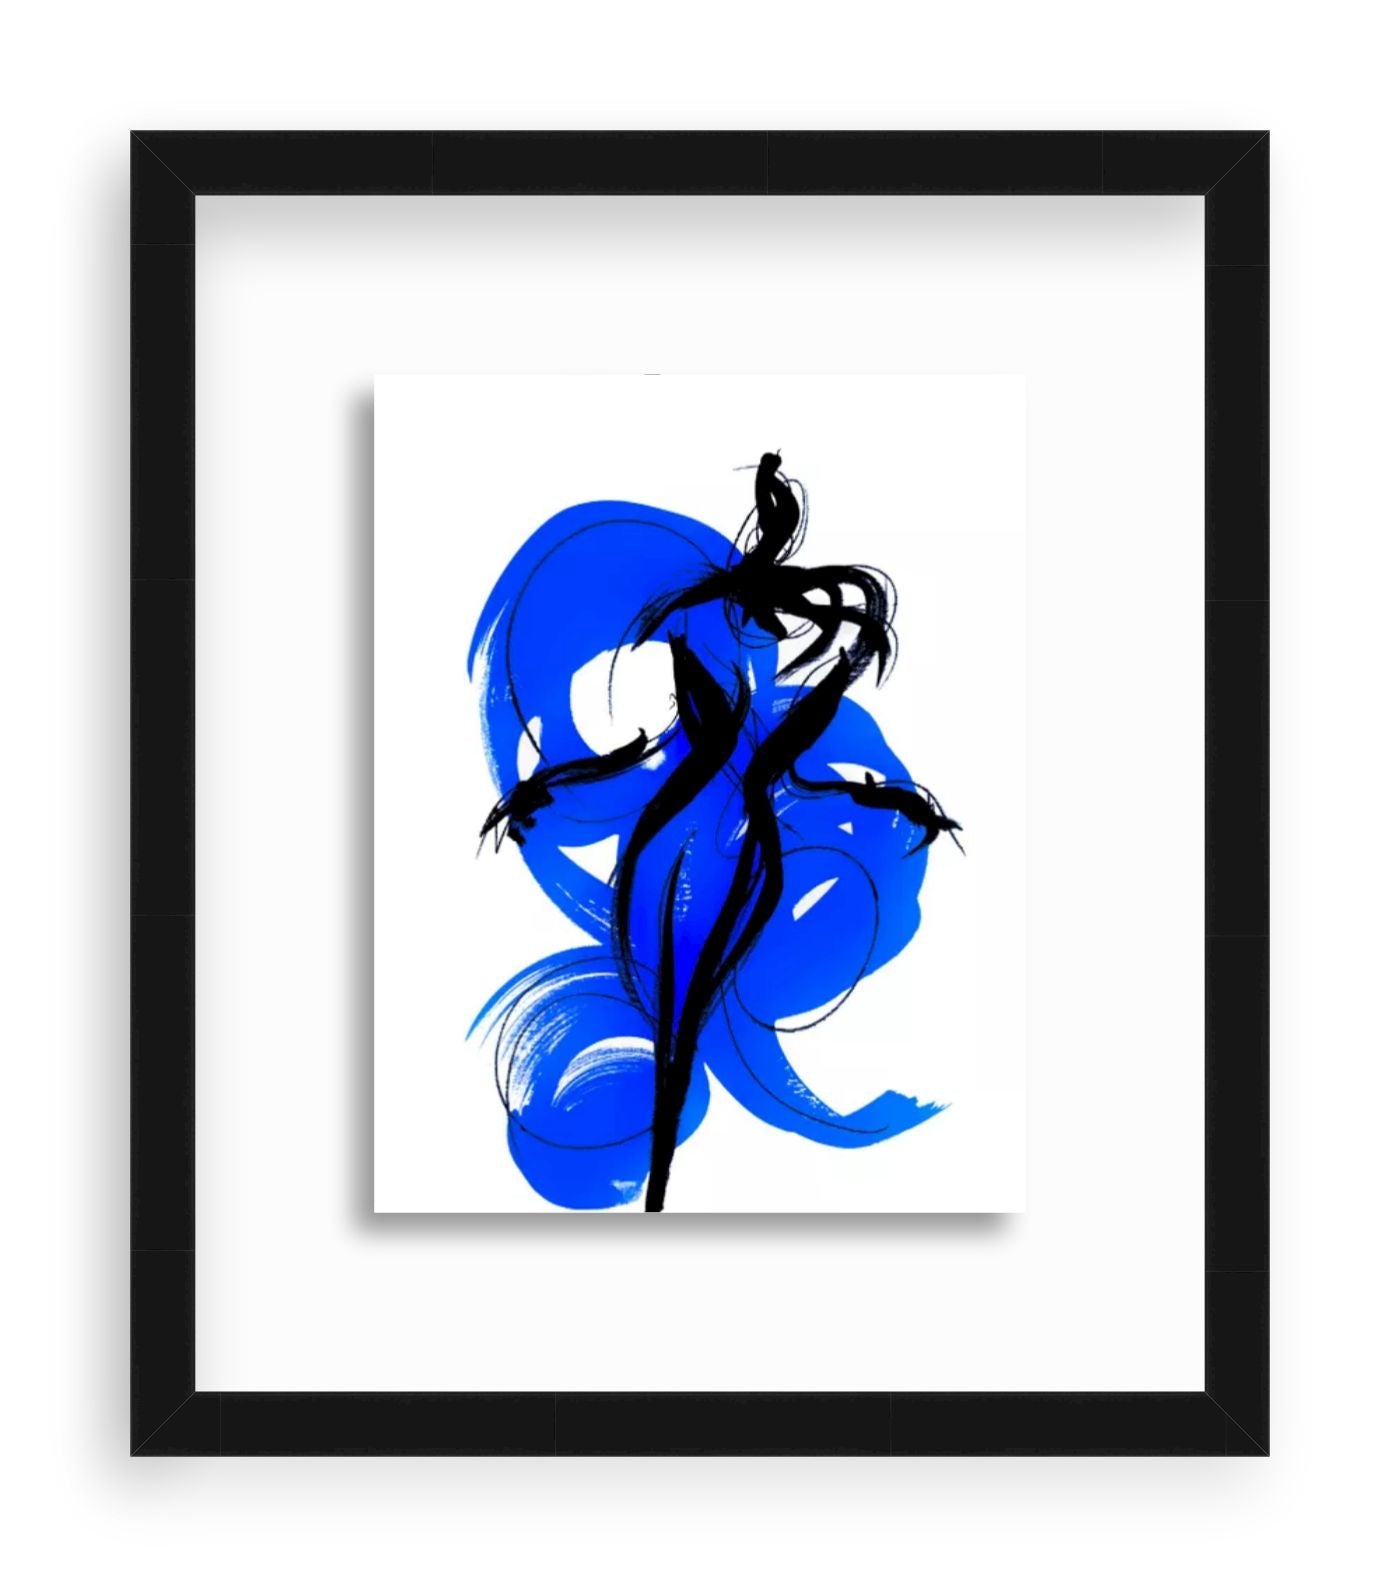 Swimming in the blue (framed)